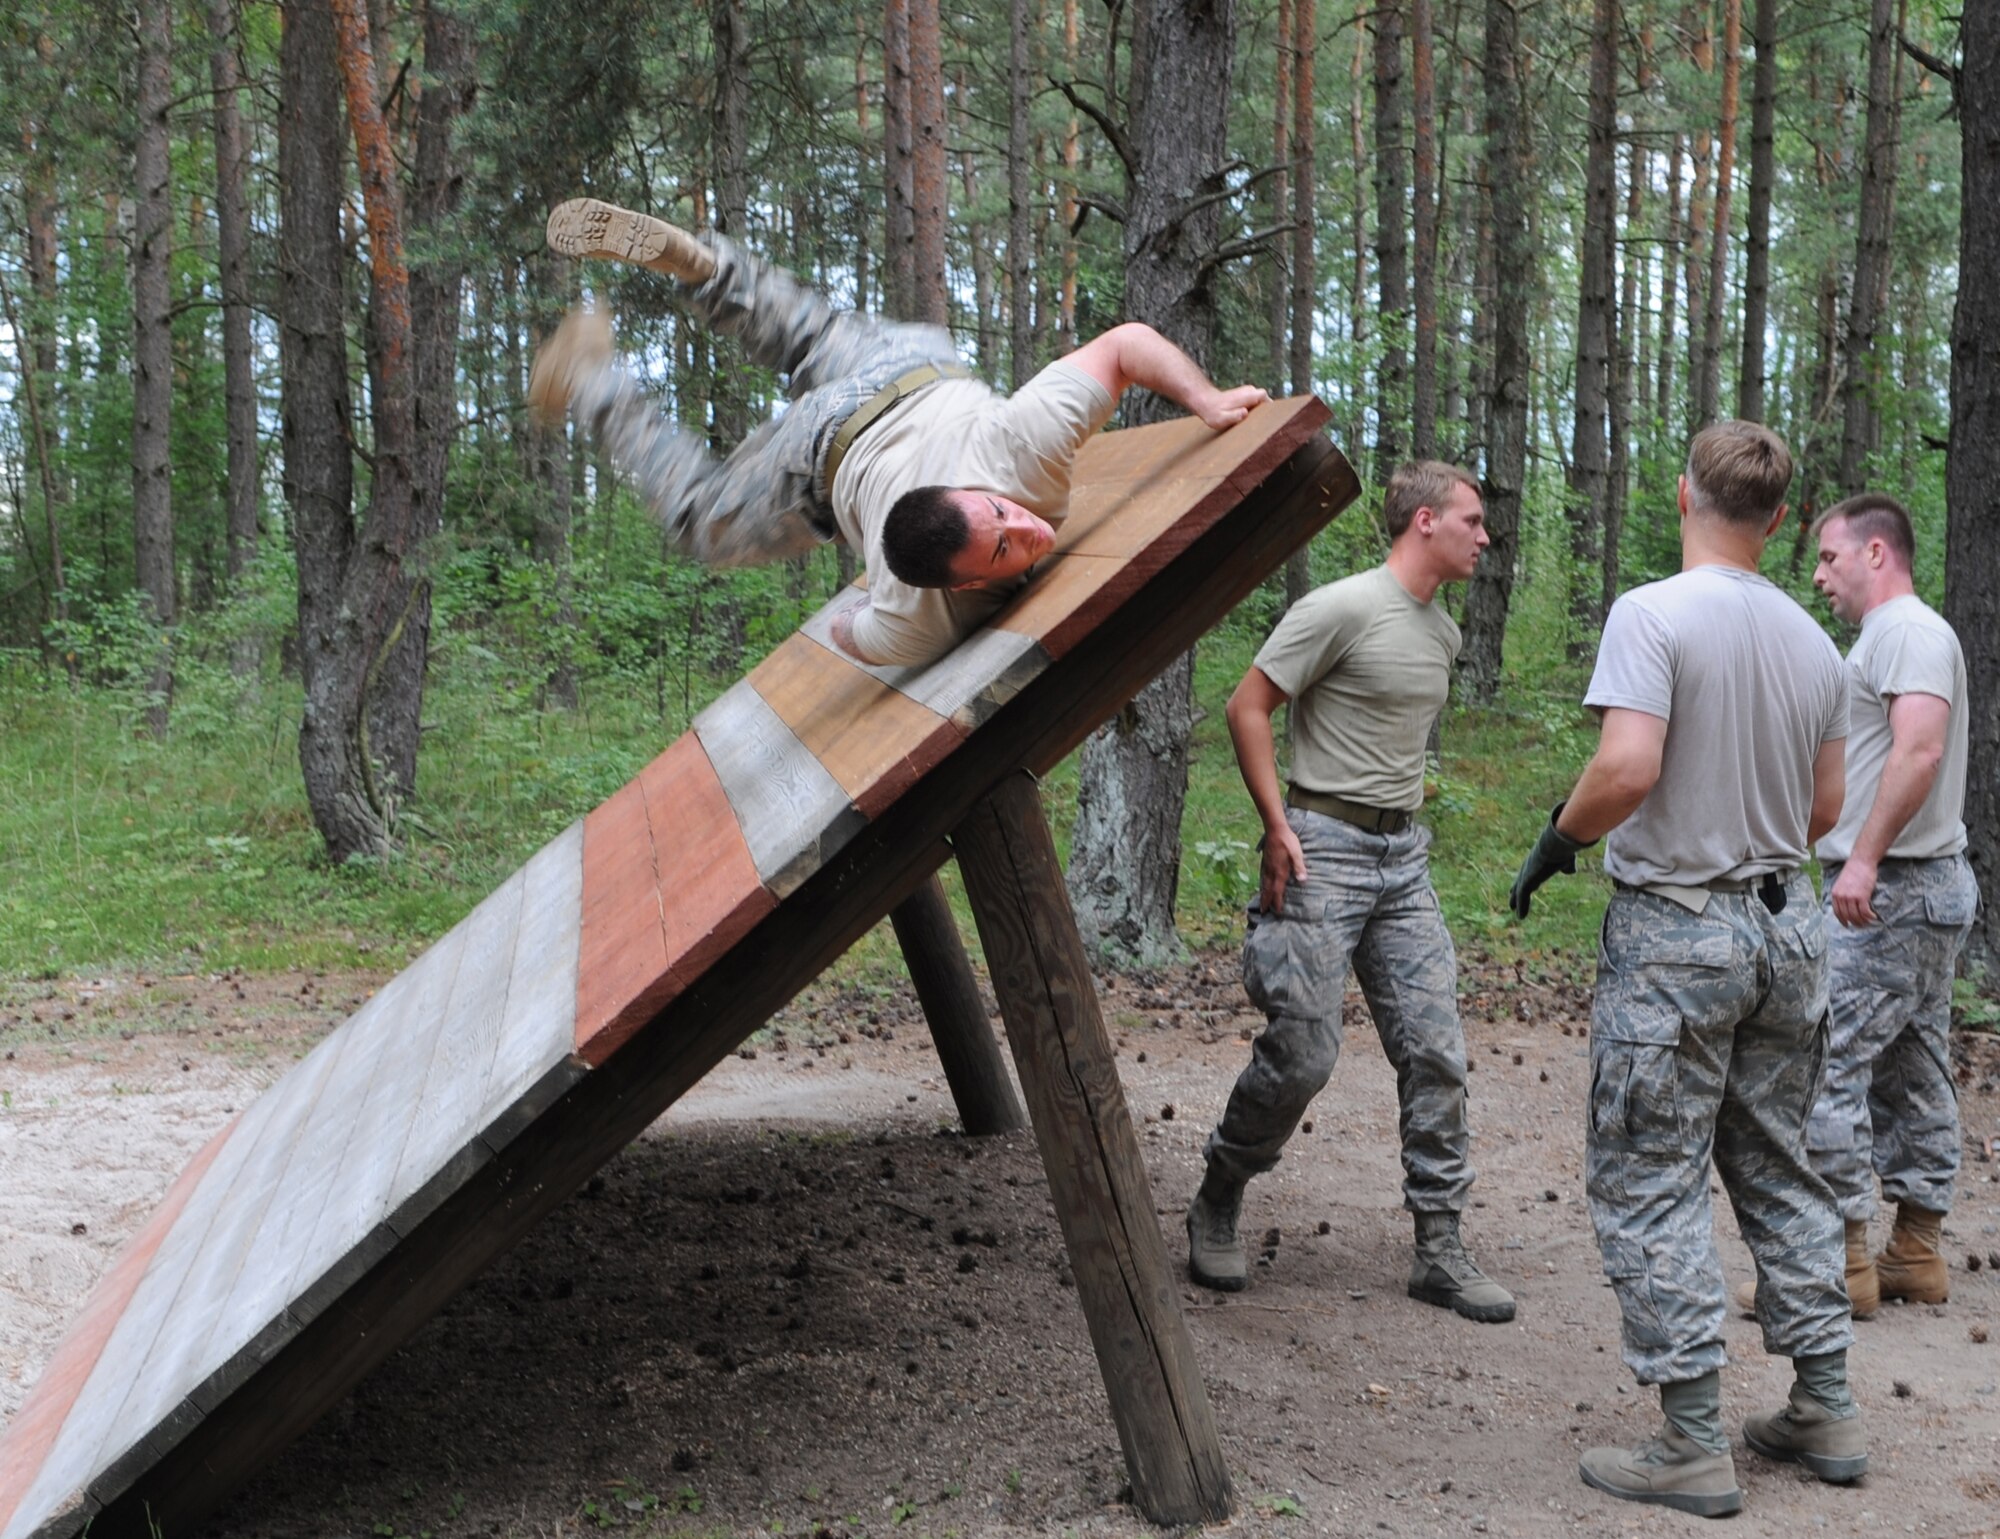 U.S. Air Force Airmen from the 8th Air Support Operations Squadron, Aviano Air Base, Italy, attempt to complete an obstacle during exercise Allied Strike 10, Grafenwoehr, Germany, July 23, 2010. Allied Strike is Europe's premier close air support (CAS) exercise, held annually to conduct robust, realistic CAS training that helps build partnership capacity among allied North Atlantic Treaty Organization nations and joint services while refining the latest operational CAS tactics. For more ALLIED STRIKE information go to www.usafe.af.mil/alliedstrike.asp. (U.S. Air Force photo by Senior Airman Caleb Pierce)